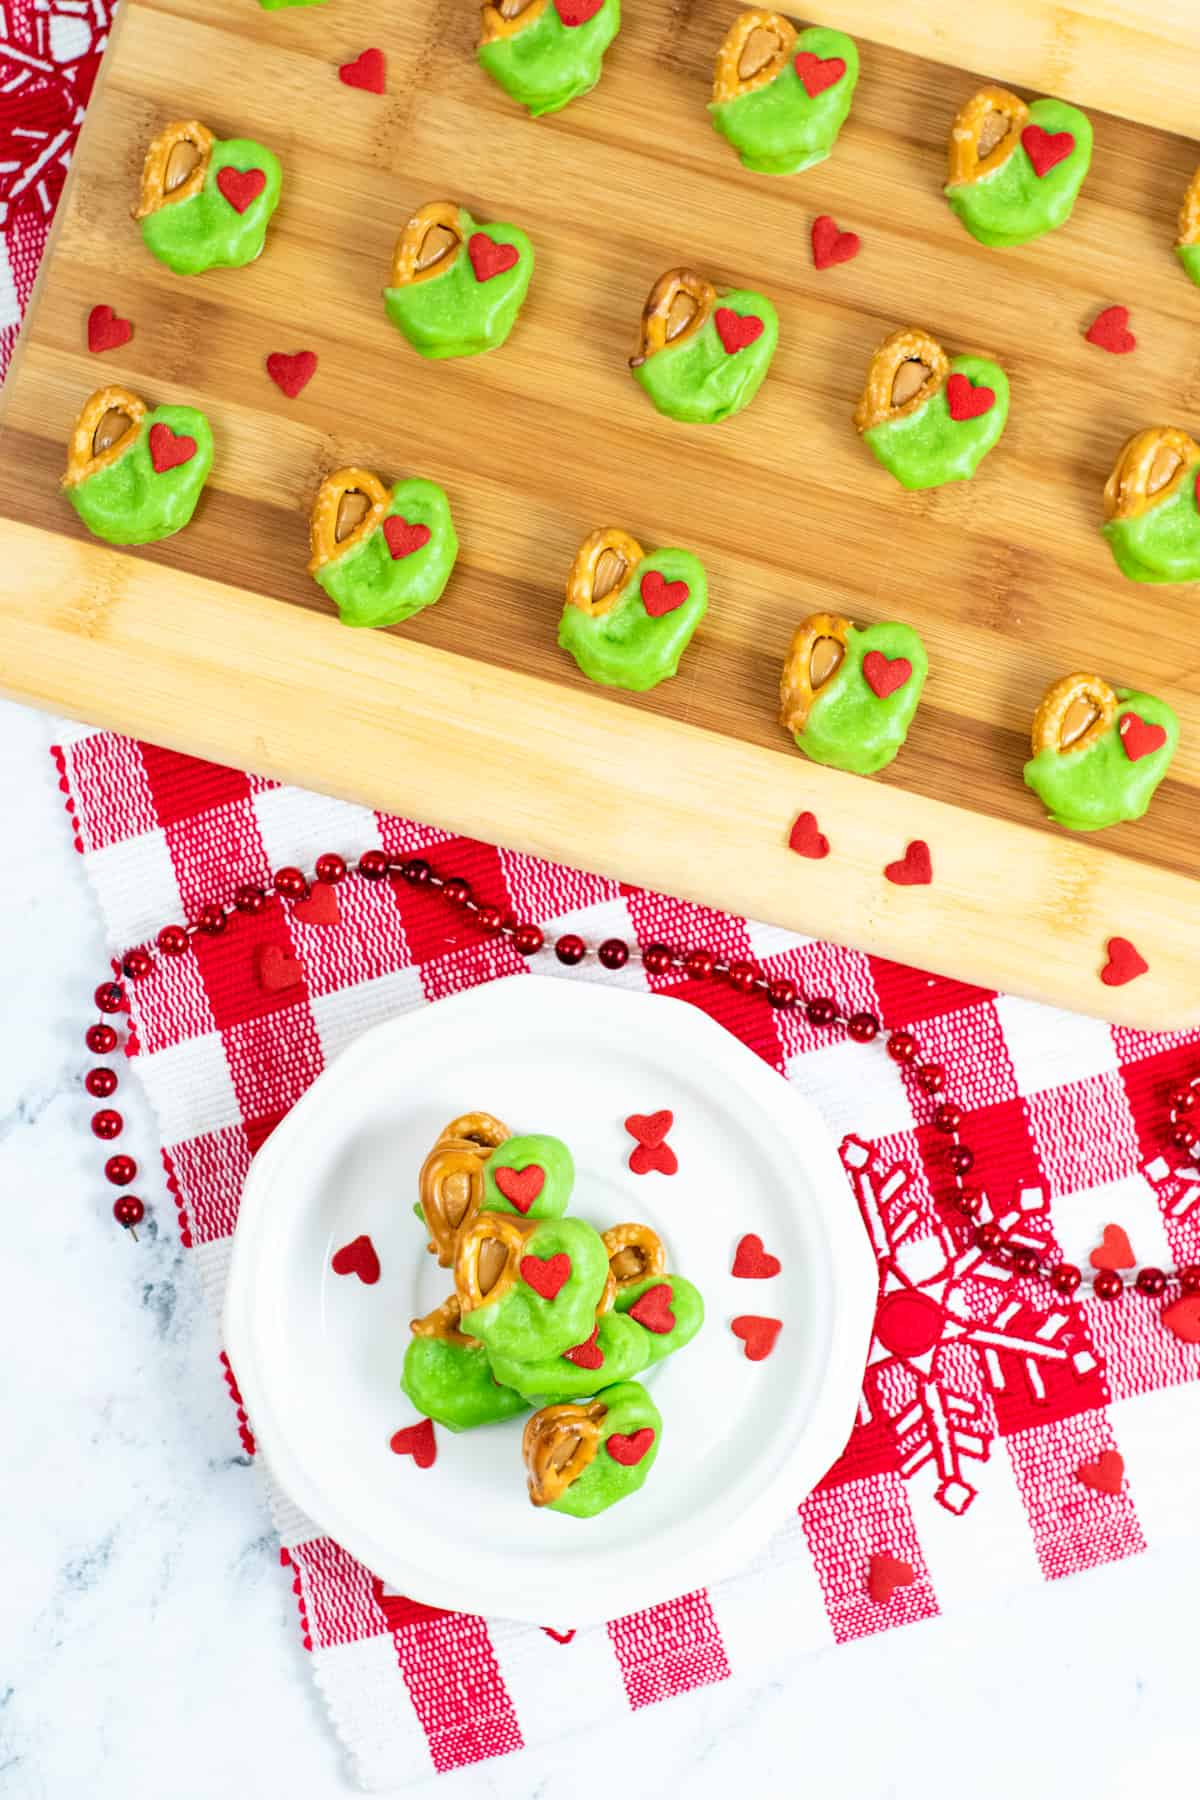 Grinch Pretzel Bites on white plate with red heart sprinkles sprinkled around them and a tray of neatly arranged pretzel bites in background